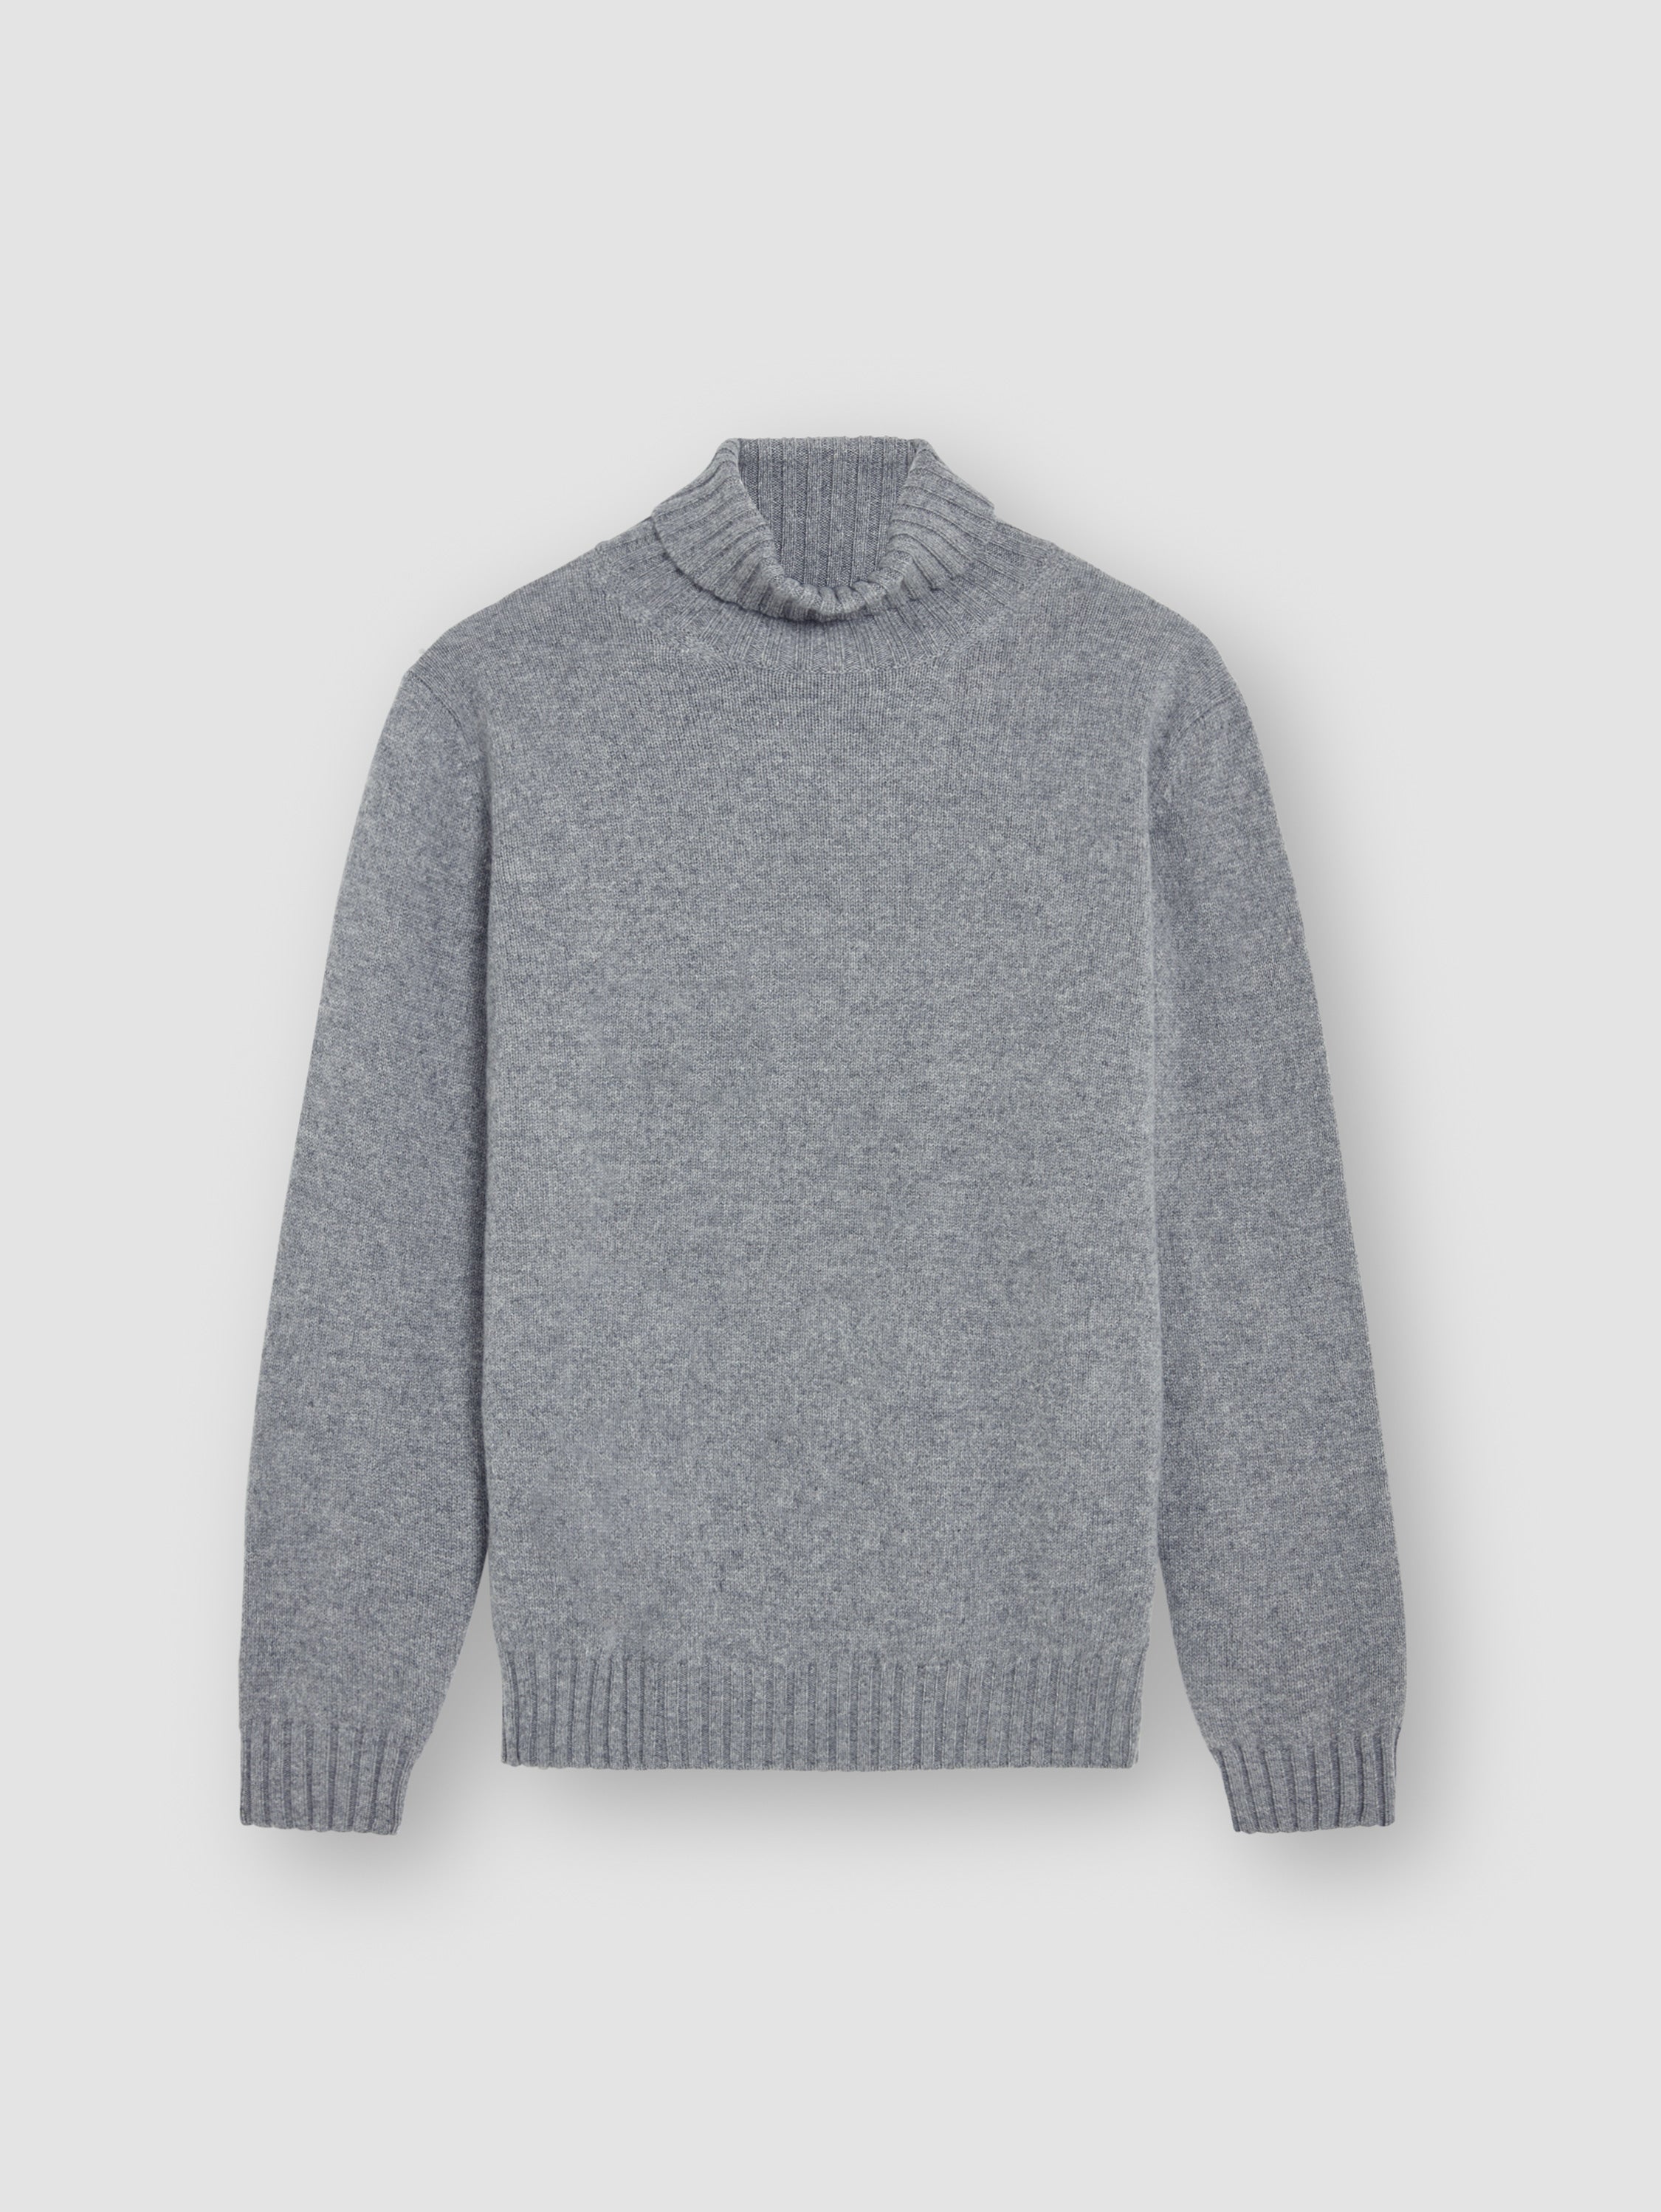 Cashmere Roll Neck Sweater Grey Product Image